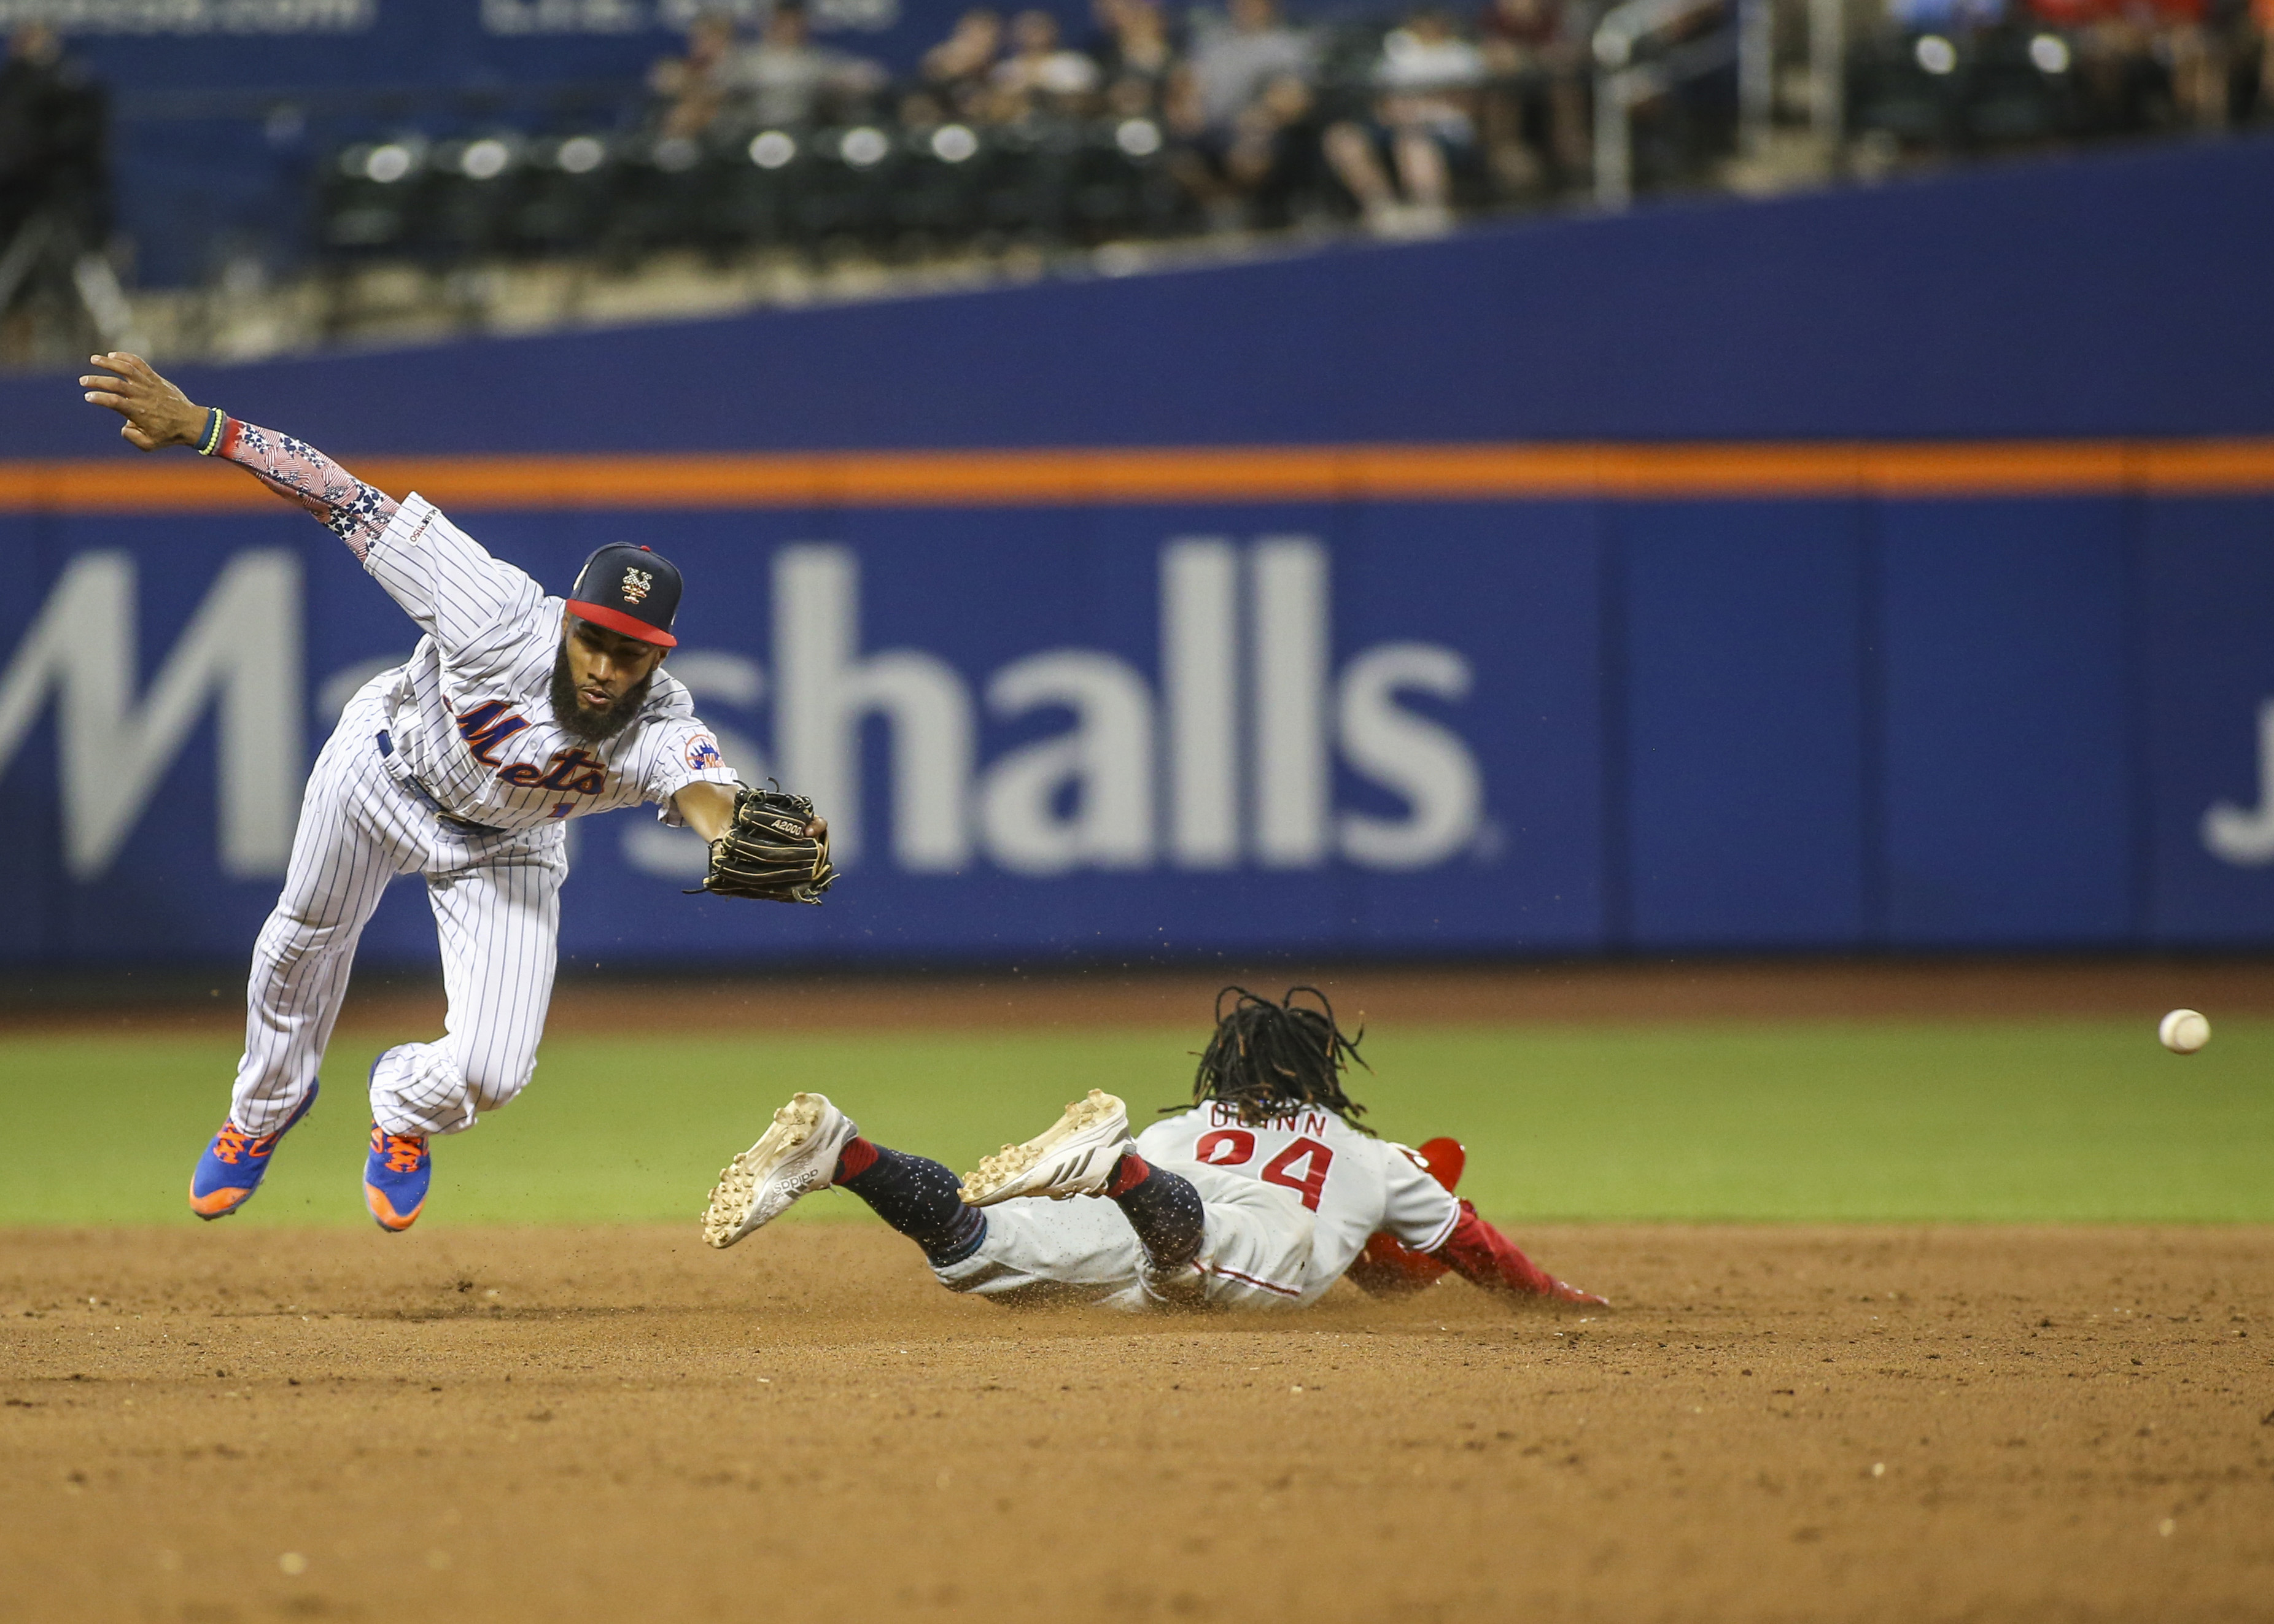 7/6/19 Game Preview: Philadelphia Phillies at New York Mets